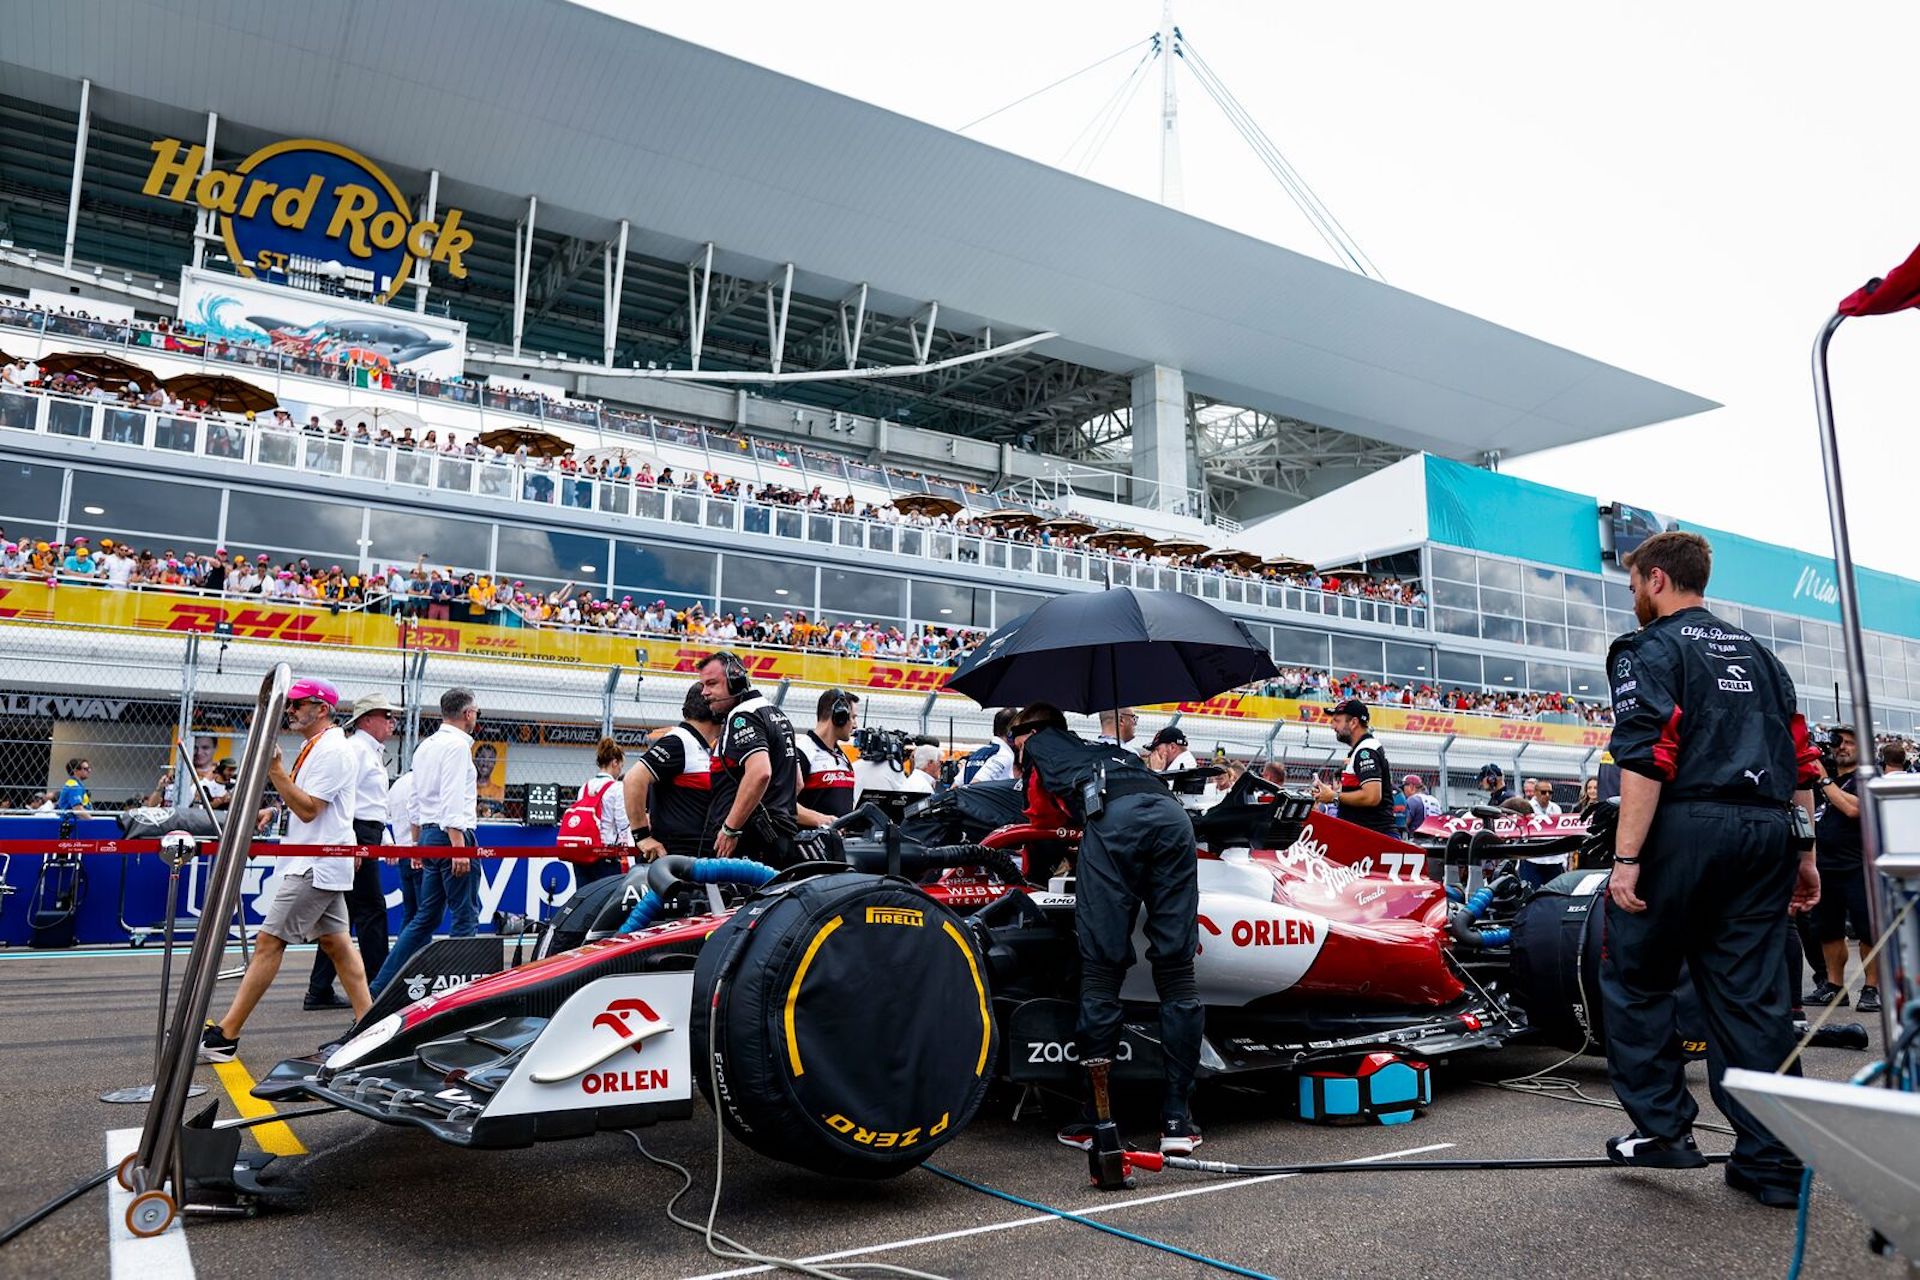 How I learned to love Formula 1 at the Miami Grand Prix